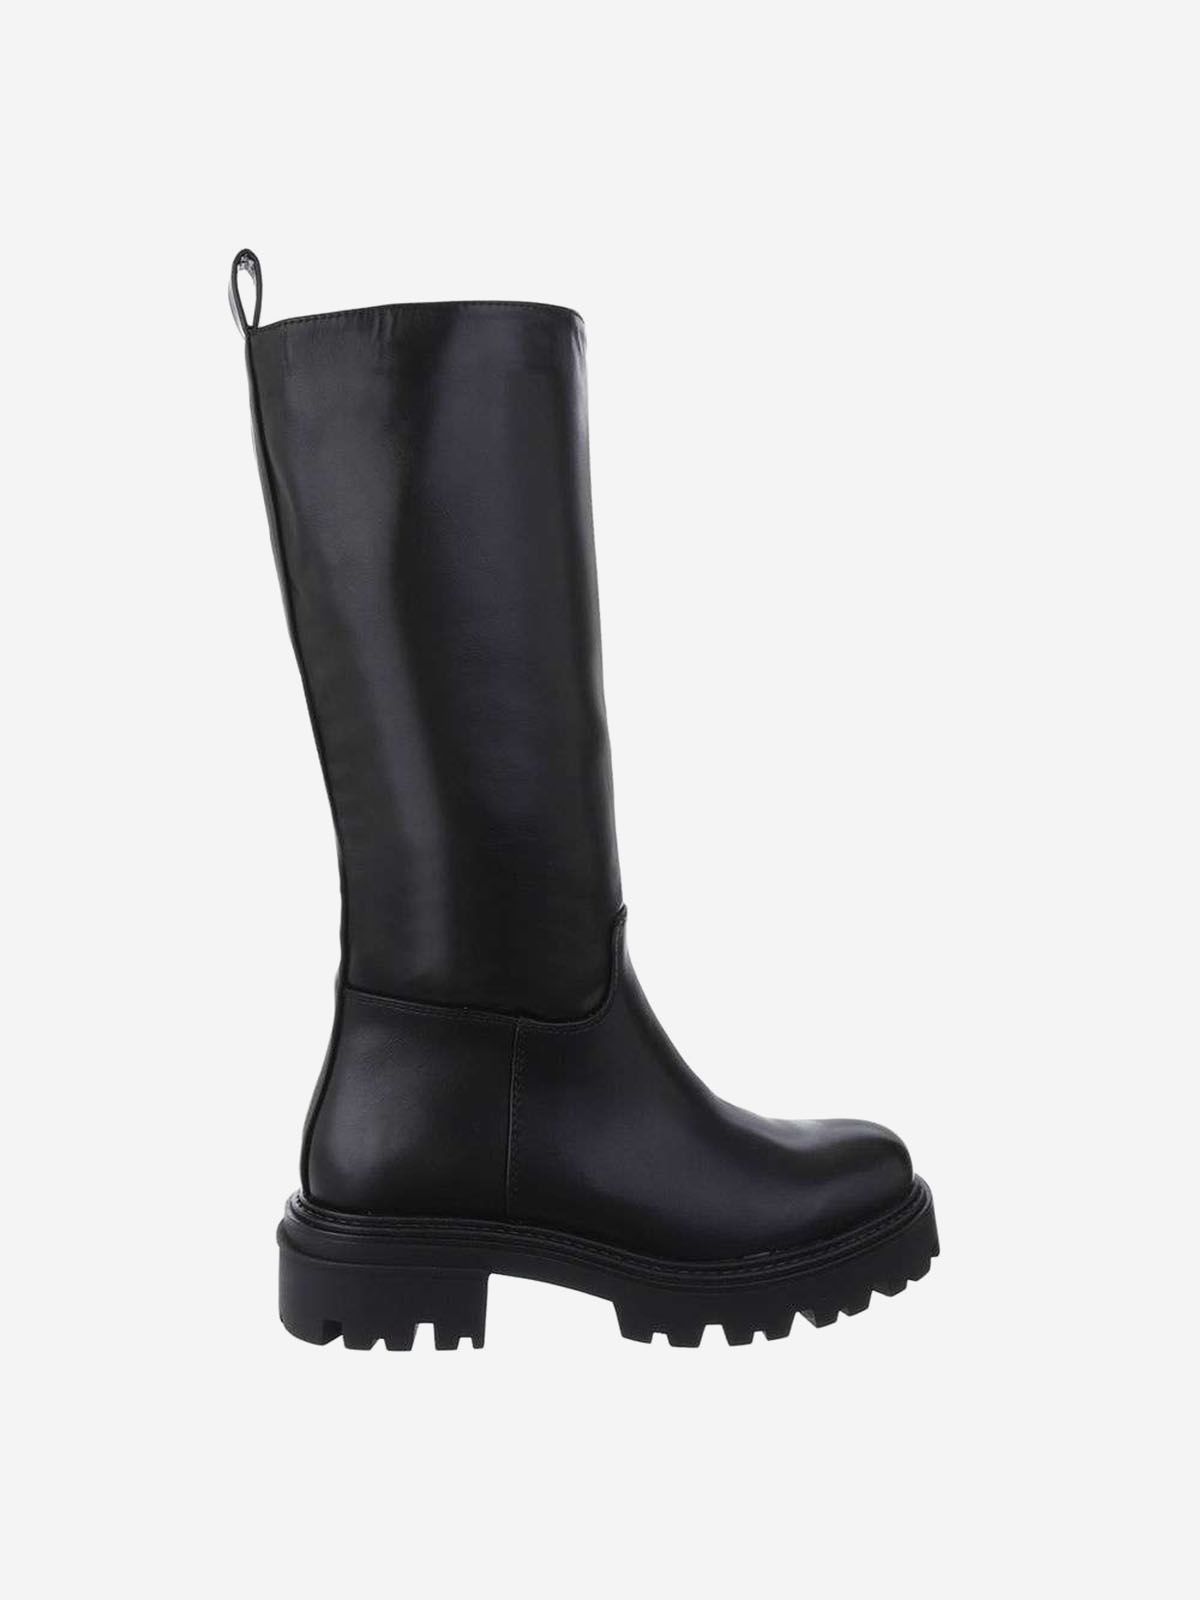 Classic women's high ankle boots with side zip in black